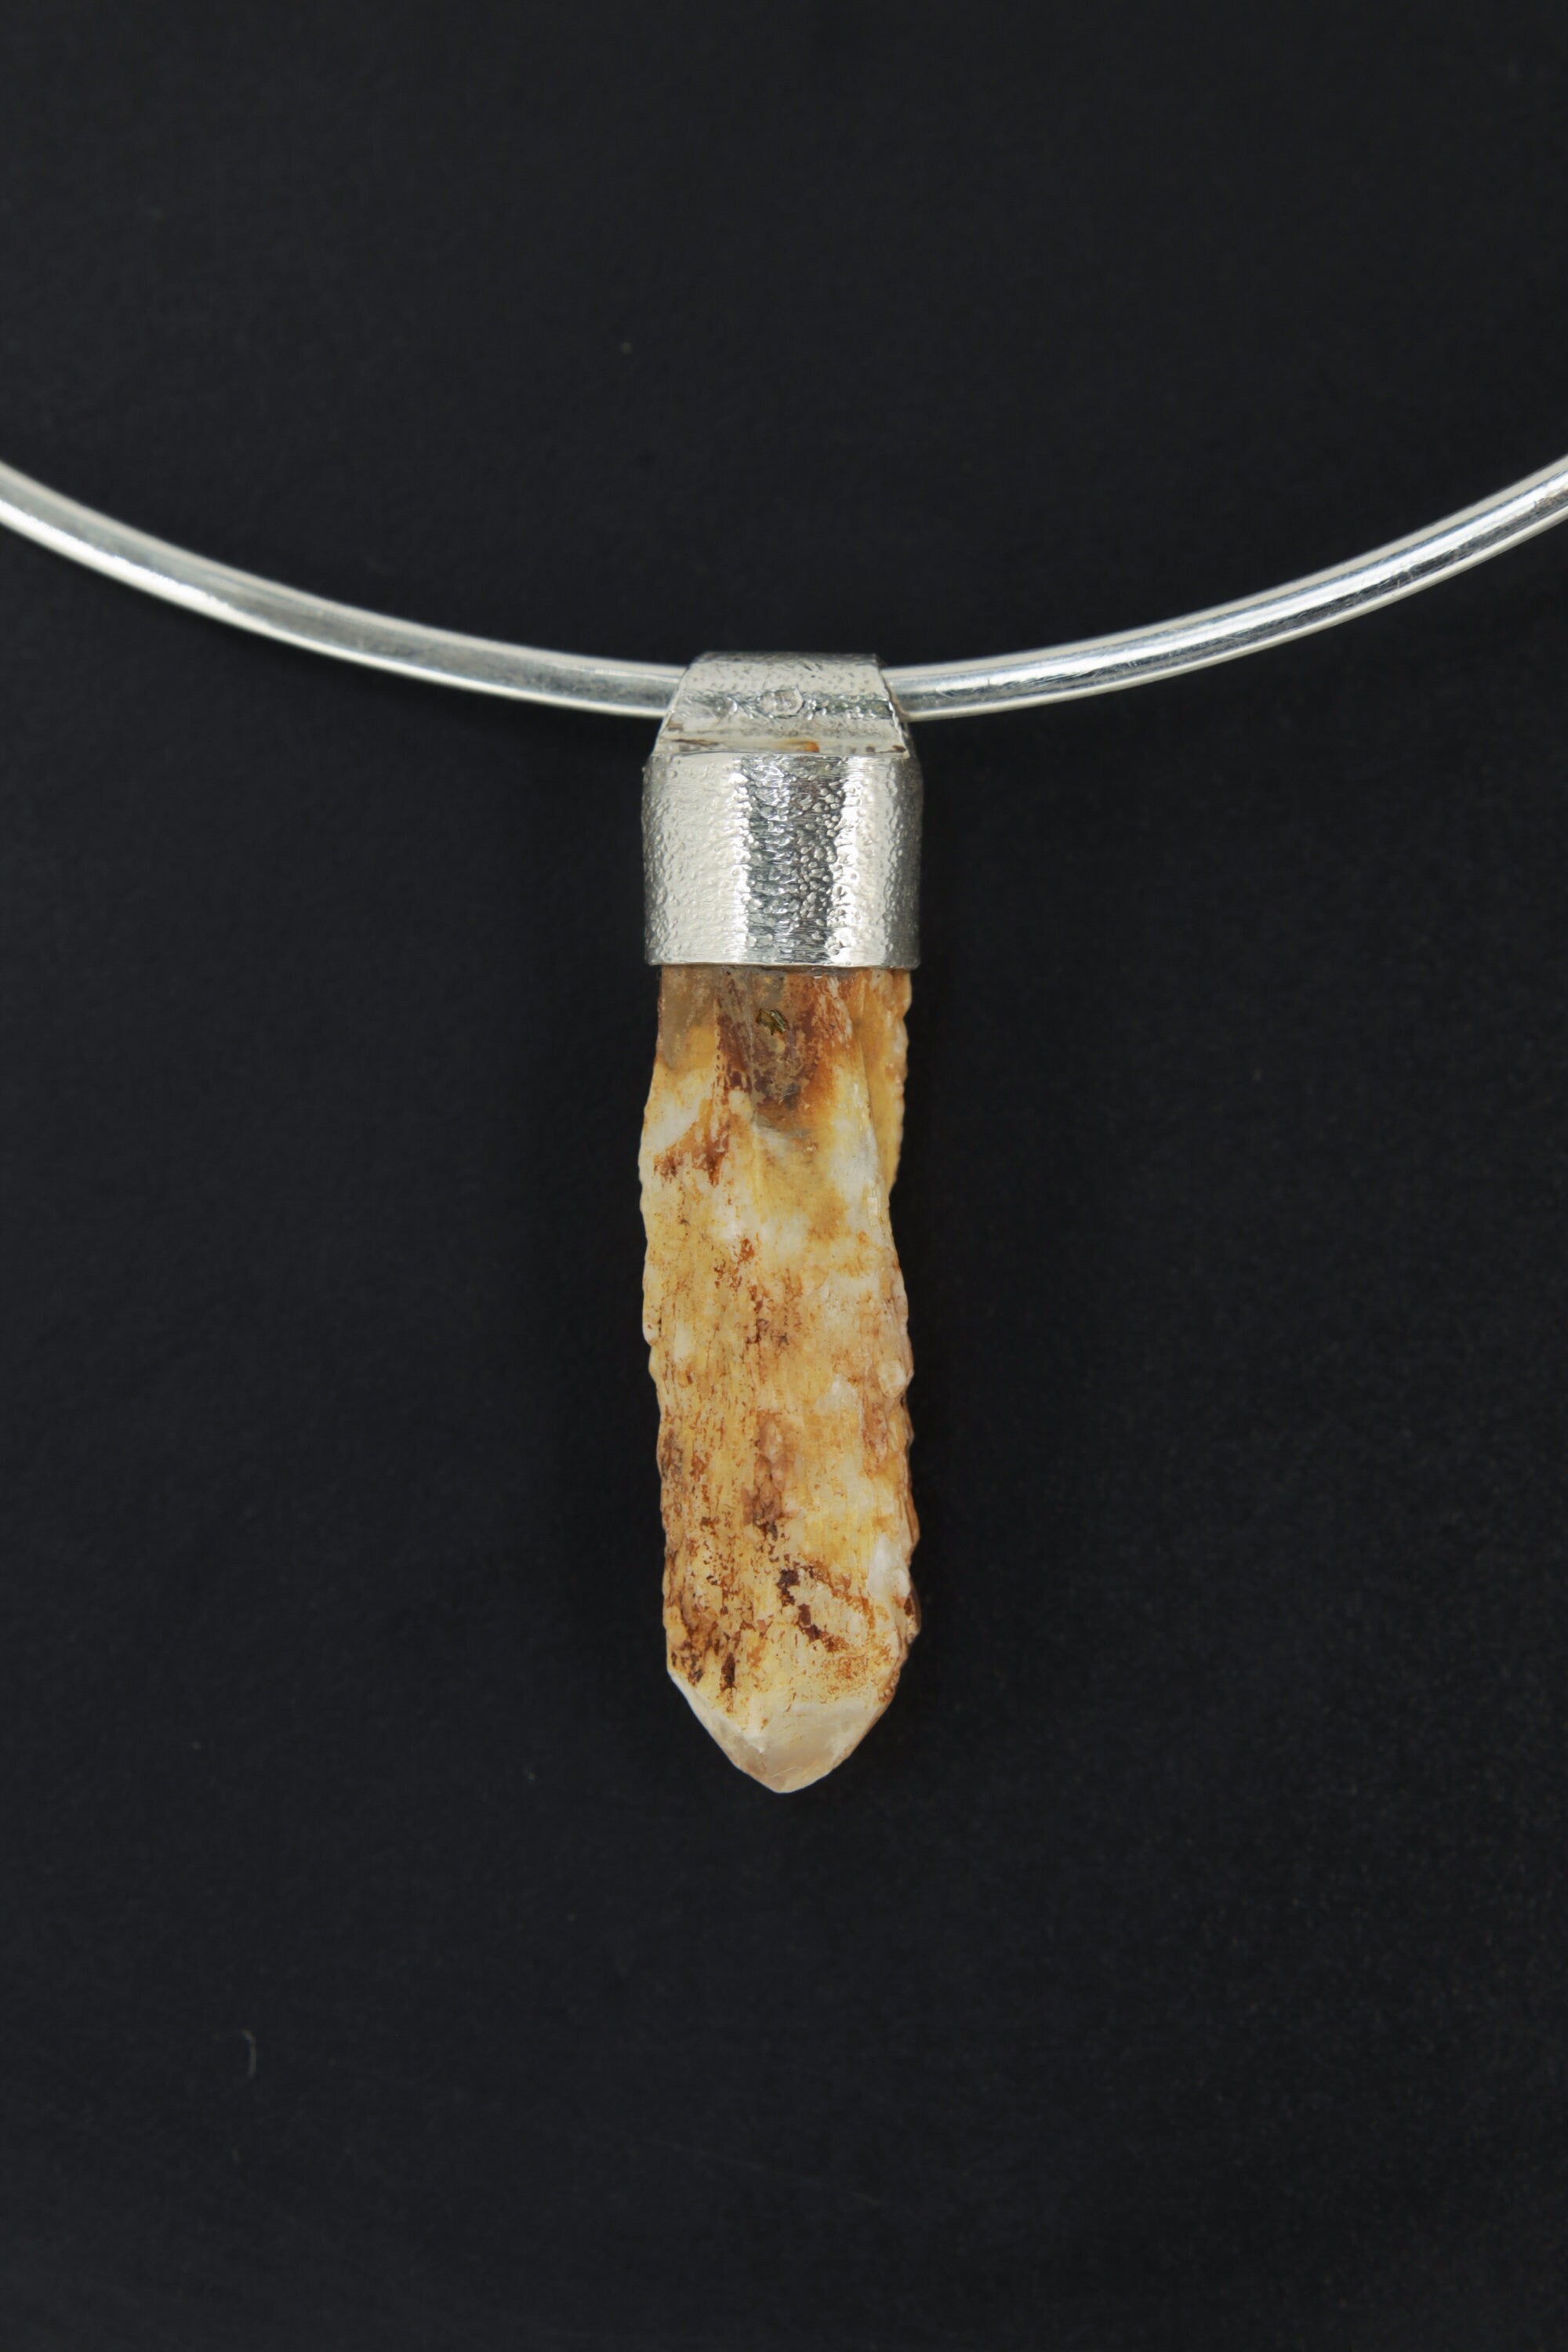 Australian Lithium Drusy Cathedral Candle Quartz Point - Stack Pendant - Organic Textured 925 Sterling Silver - Crystal Necklace